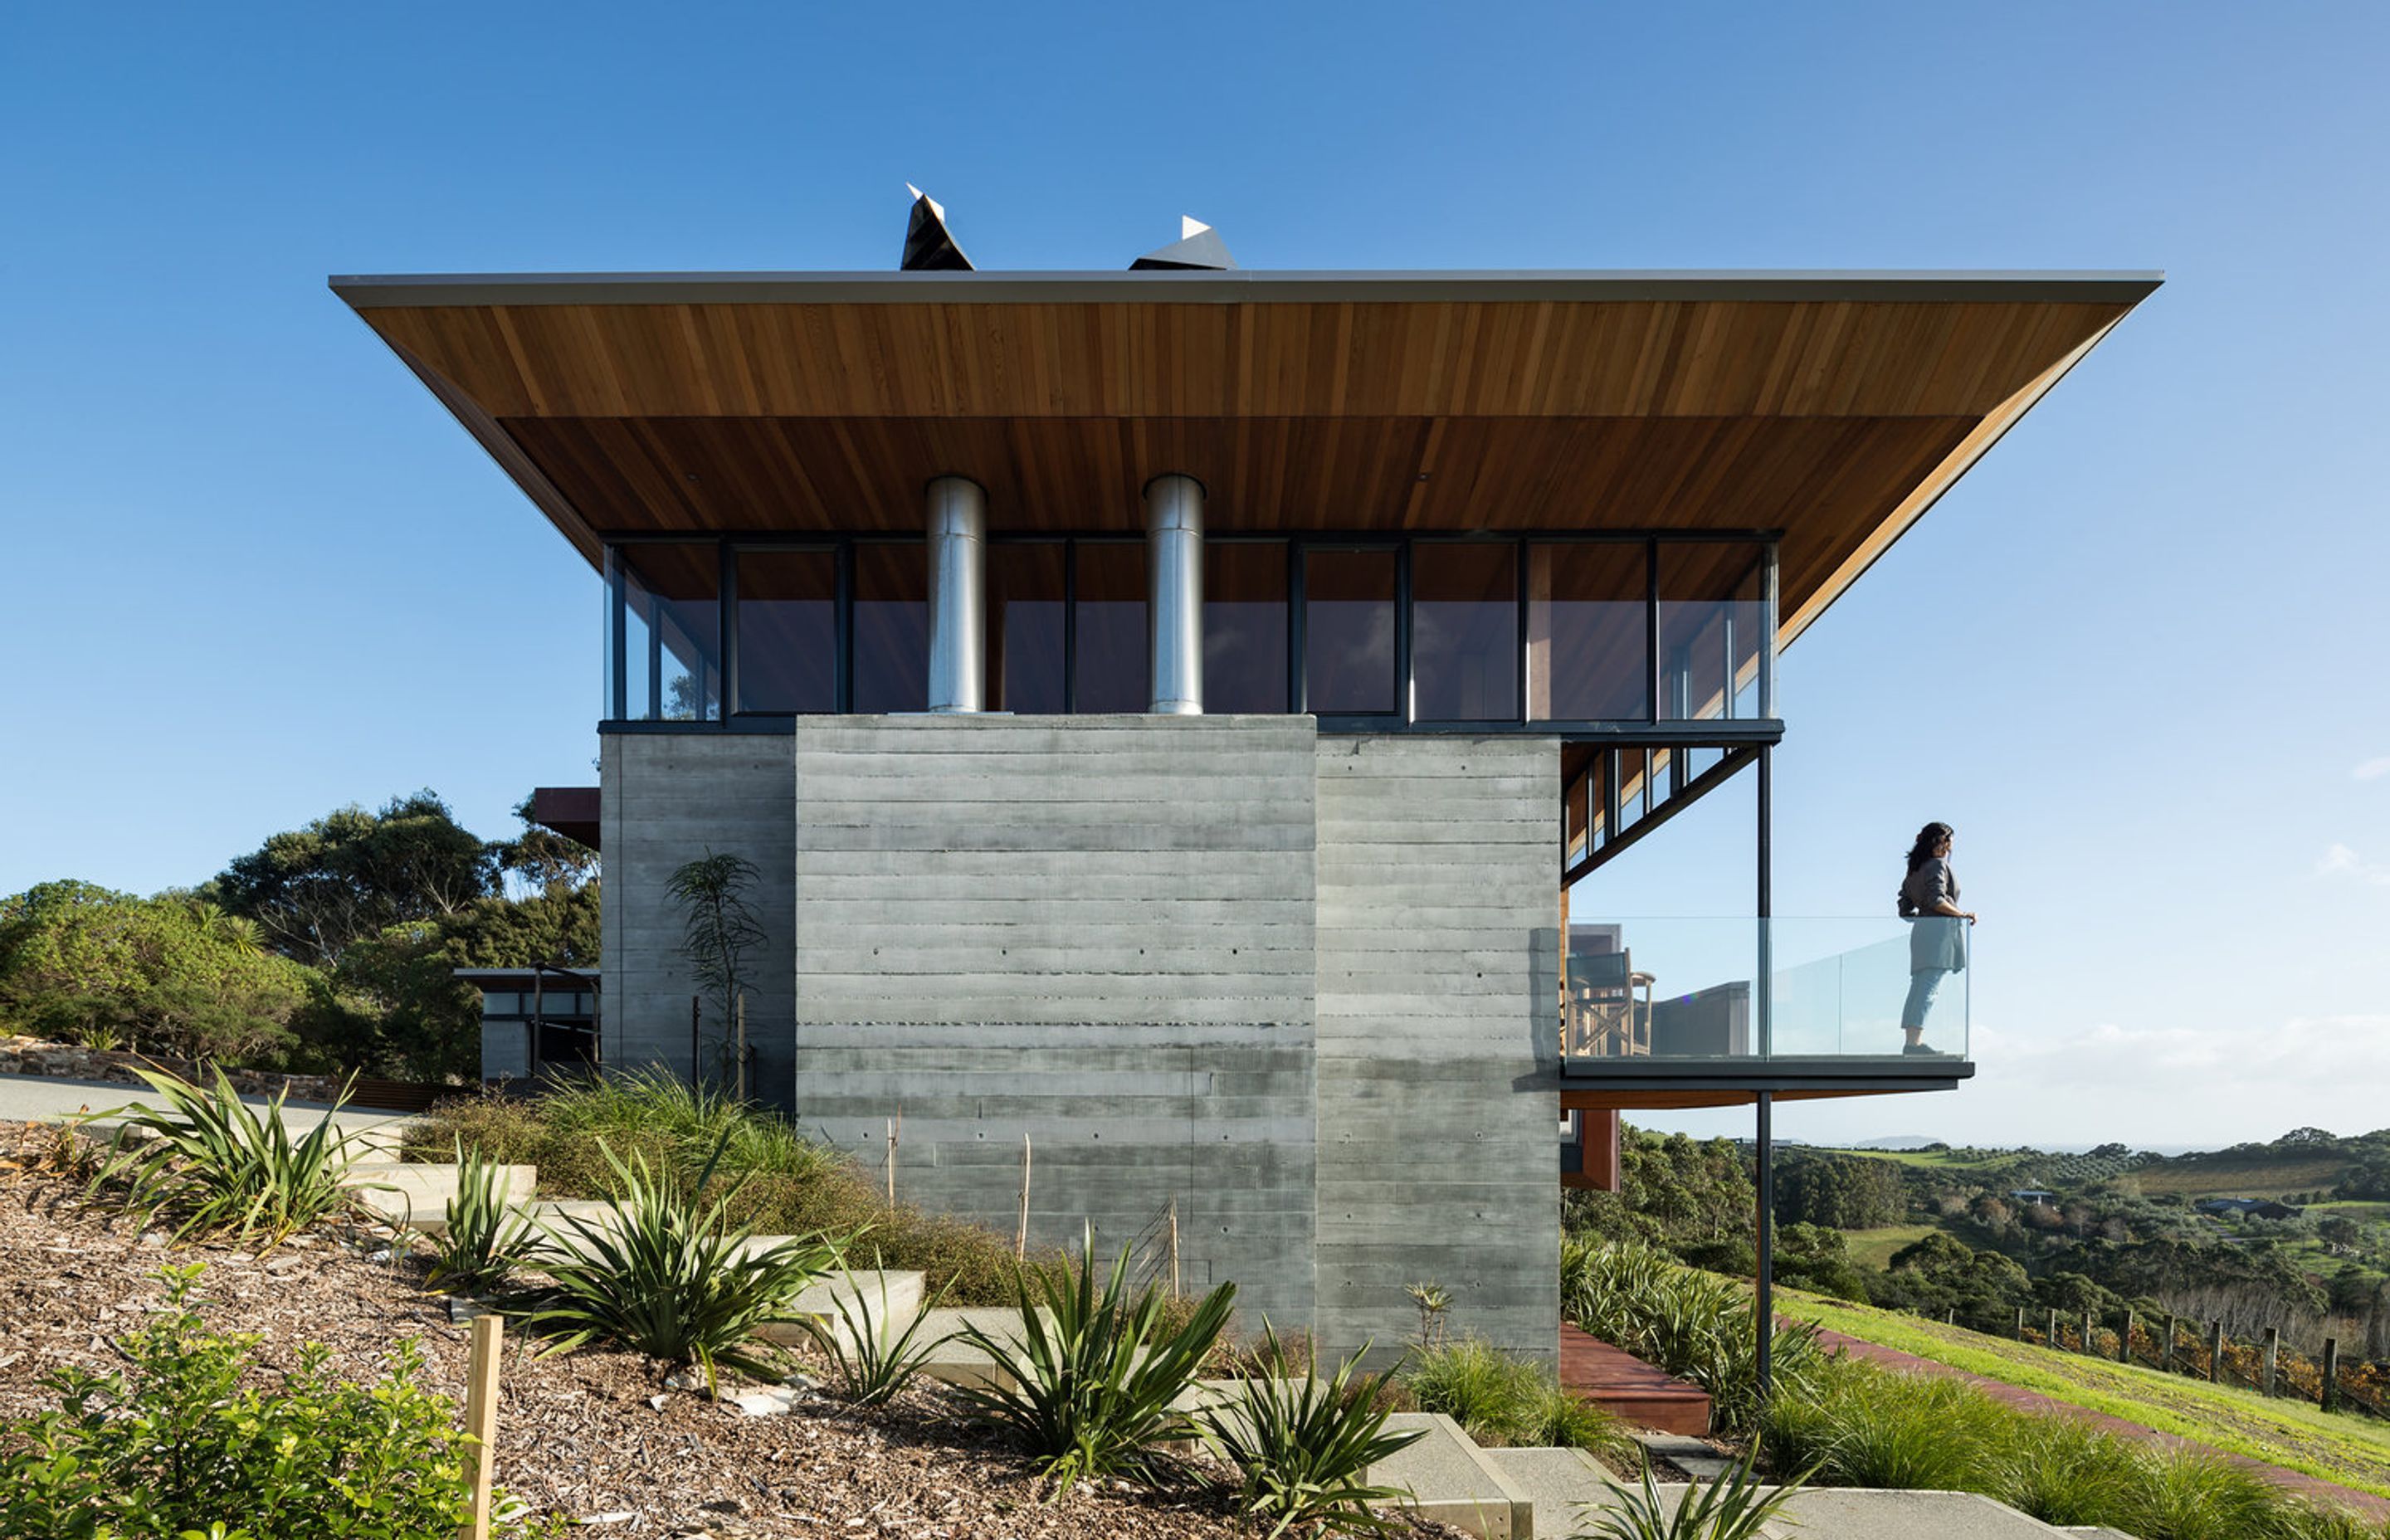 The south-facing end of the building is solid and robust to protect against southerly winds. A balcony overlooks the vineyard.